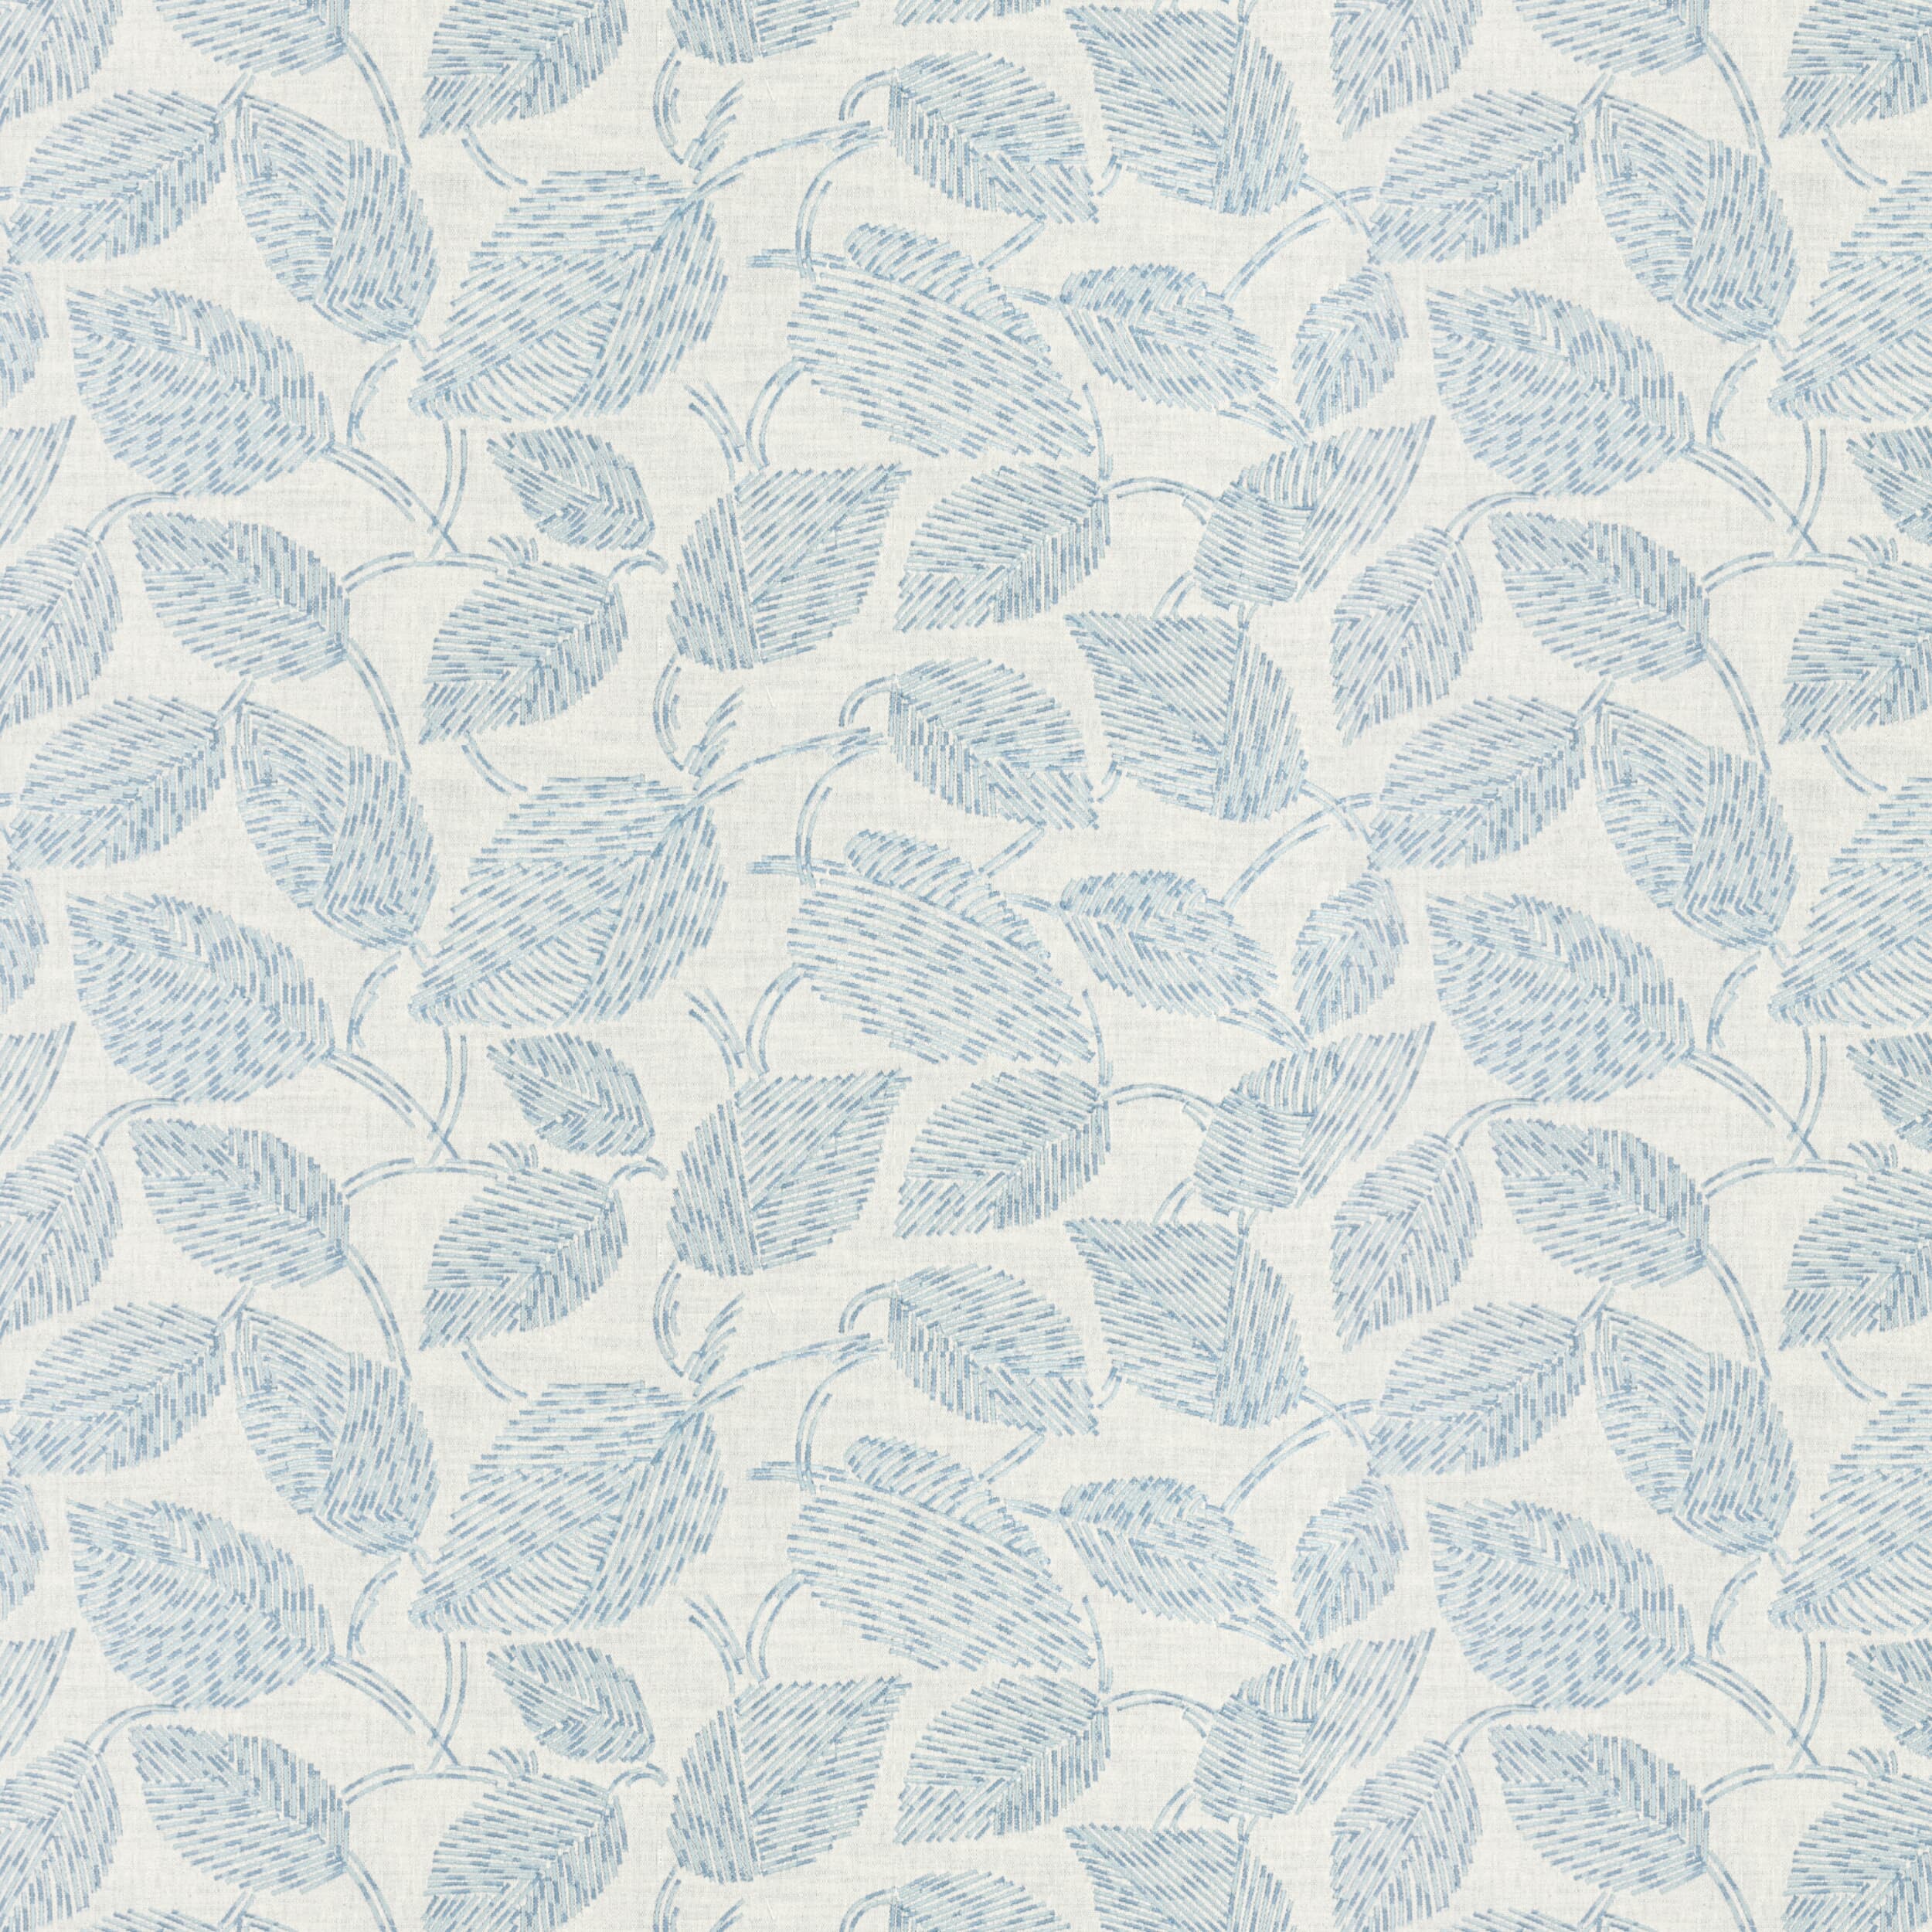 Cairo 1 Moonstone by Stout Fabric